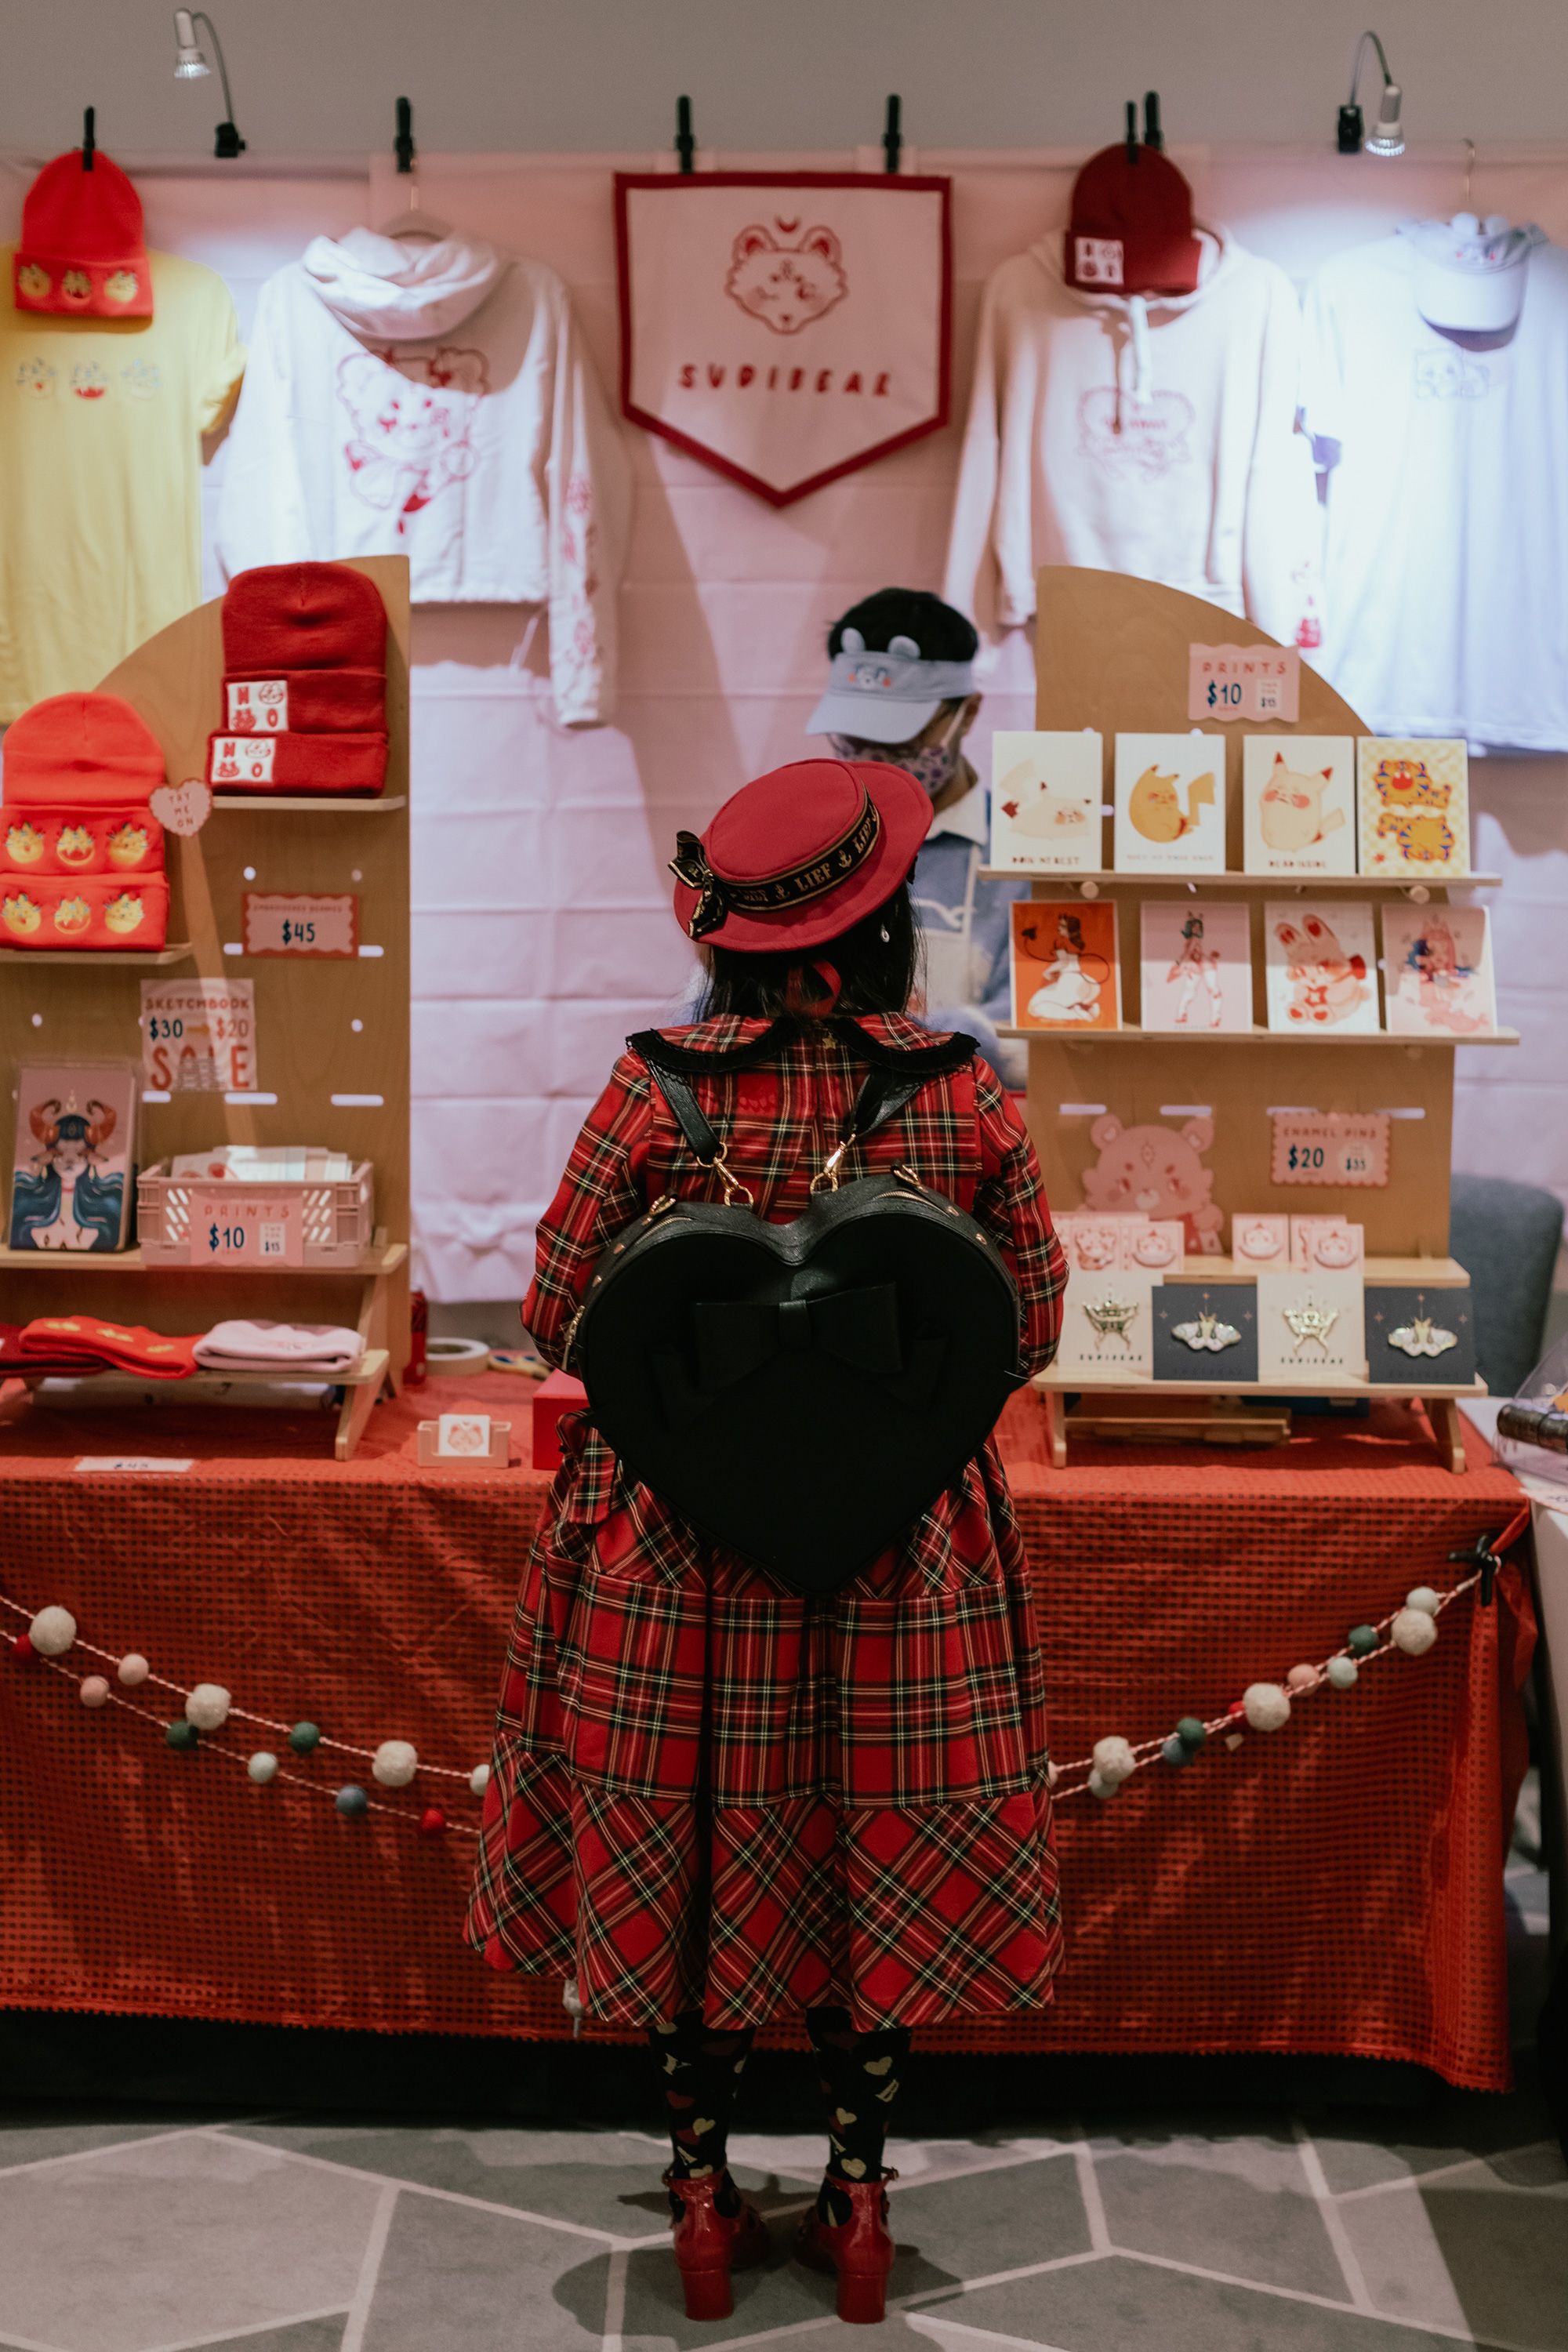 A Lolita woman shops during the annual Bay Area J-Fashion Holiday Pop-Up Shop at the Hotel Kabuki in San Francisco, California, on Dec 3, 2022. Lolitas from across California attended the event to purchase all their Lolita needs from local vendors.